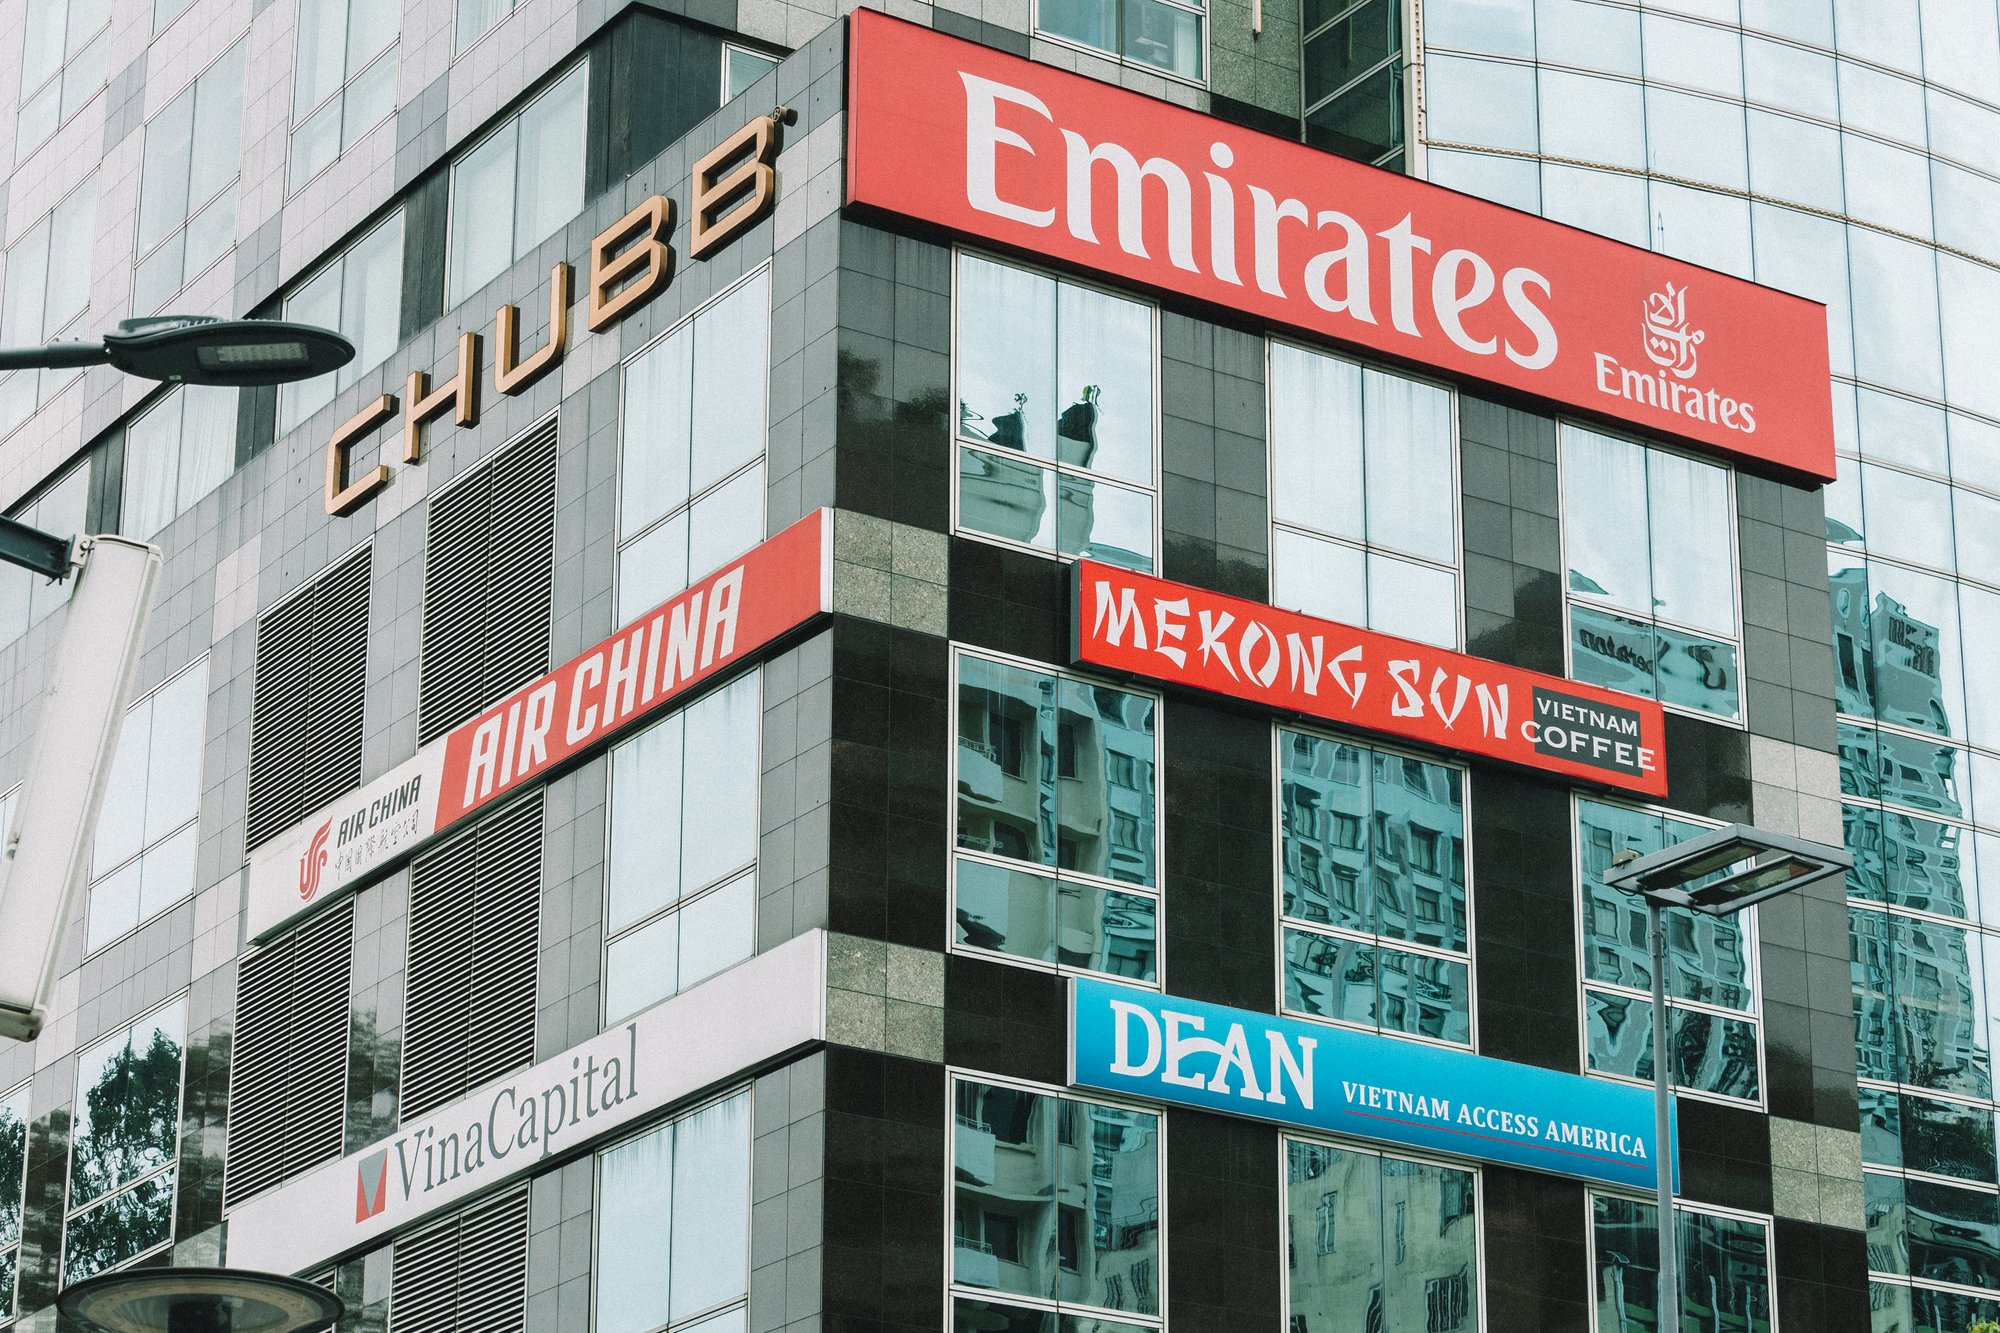 CHUBB and Emirates on Sunwah Tower